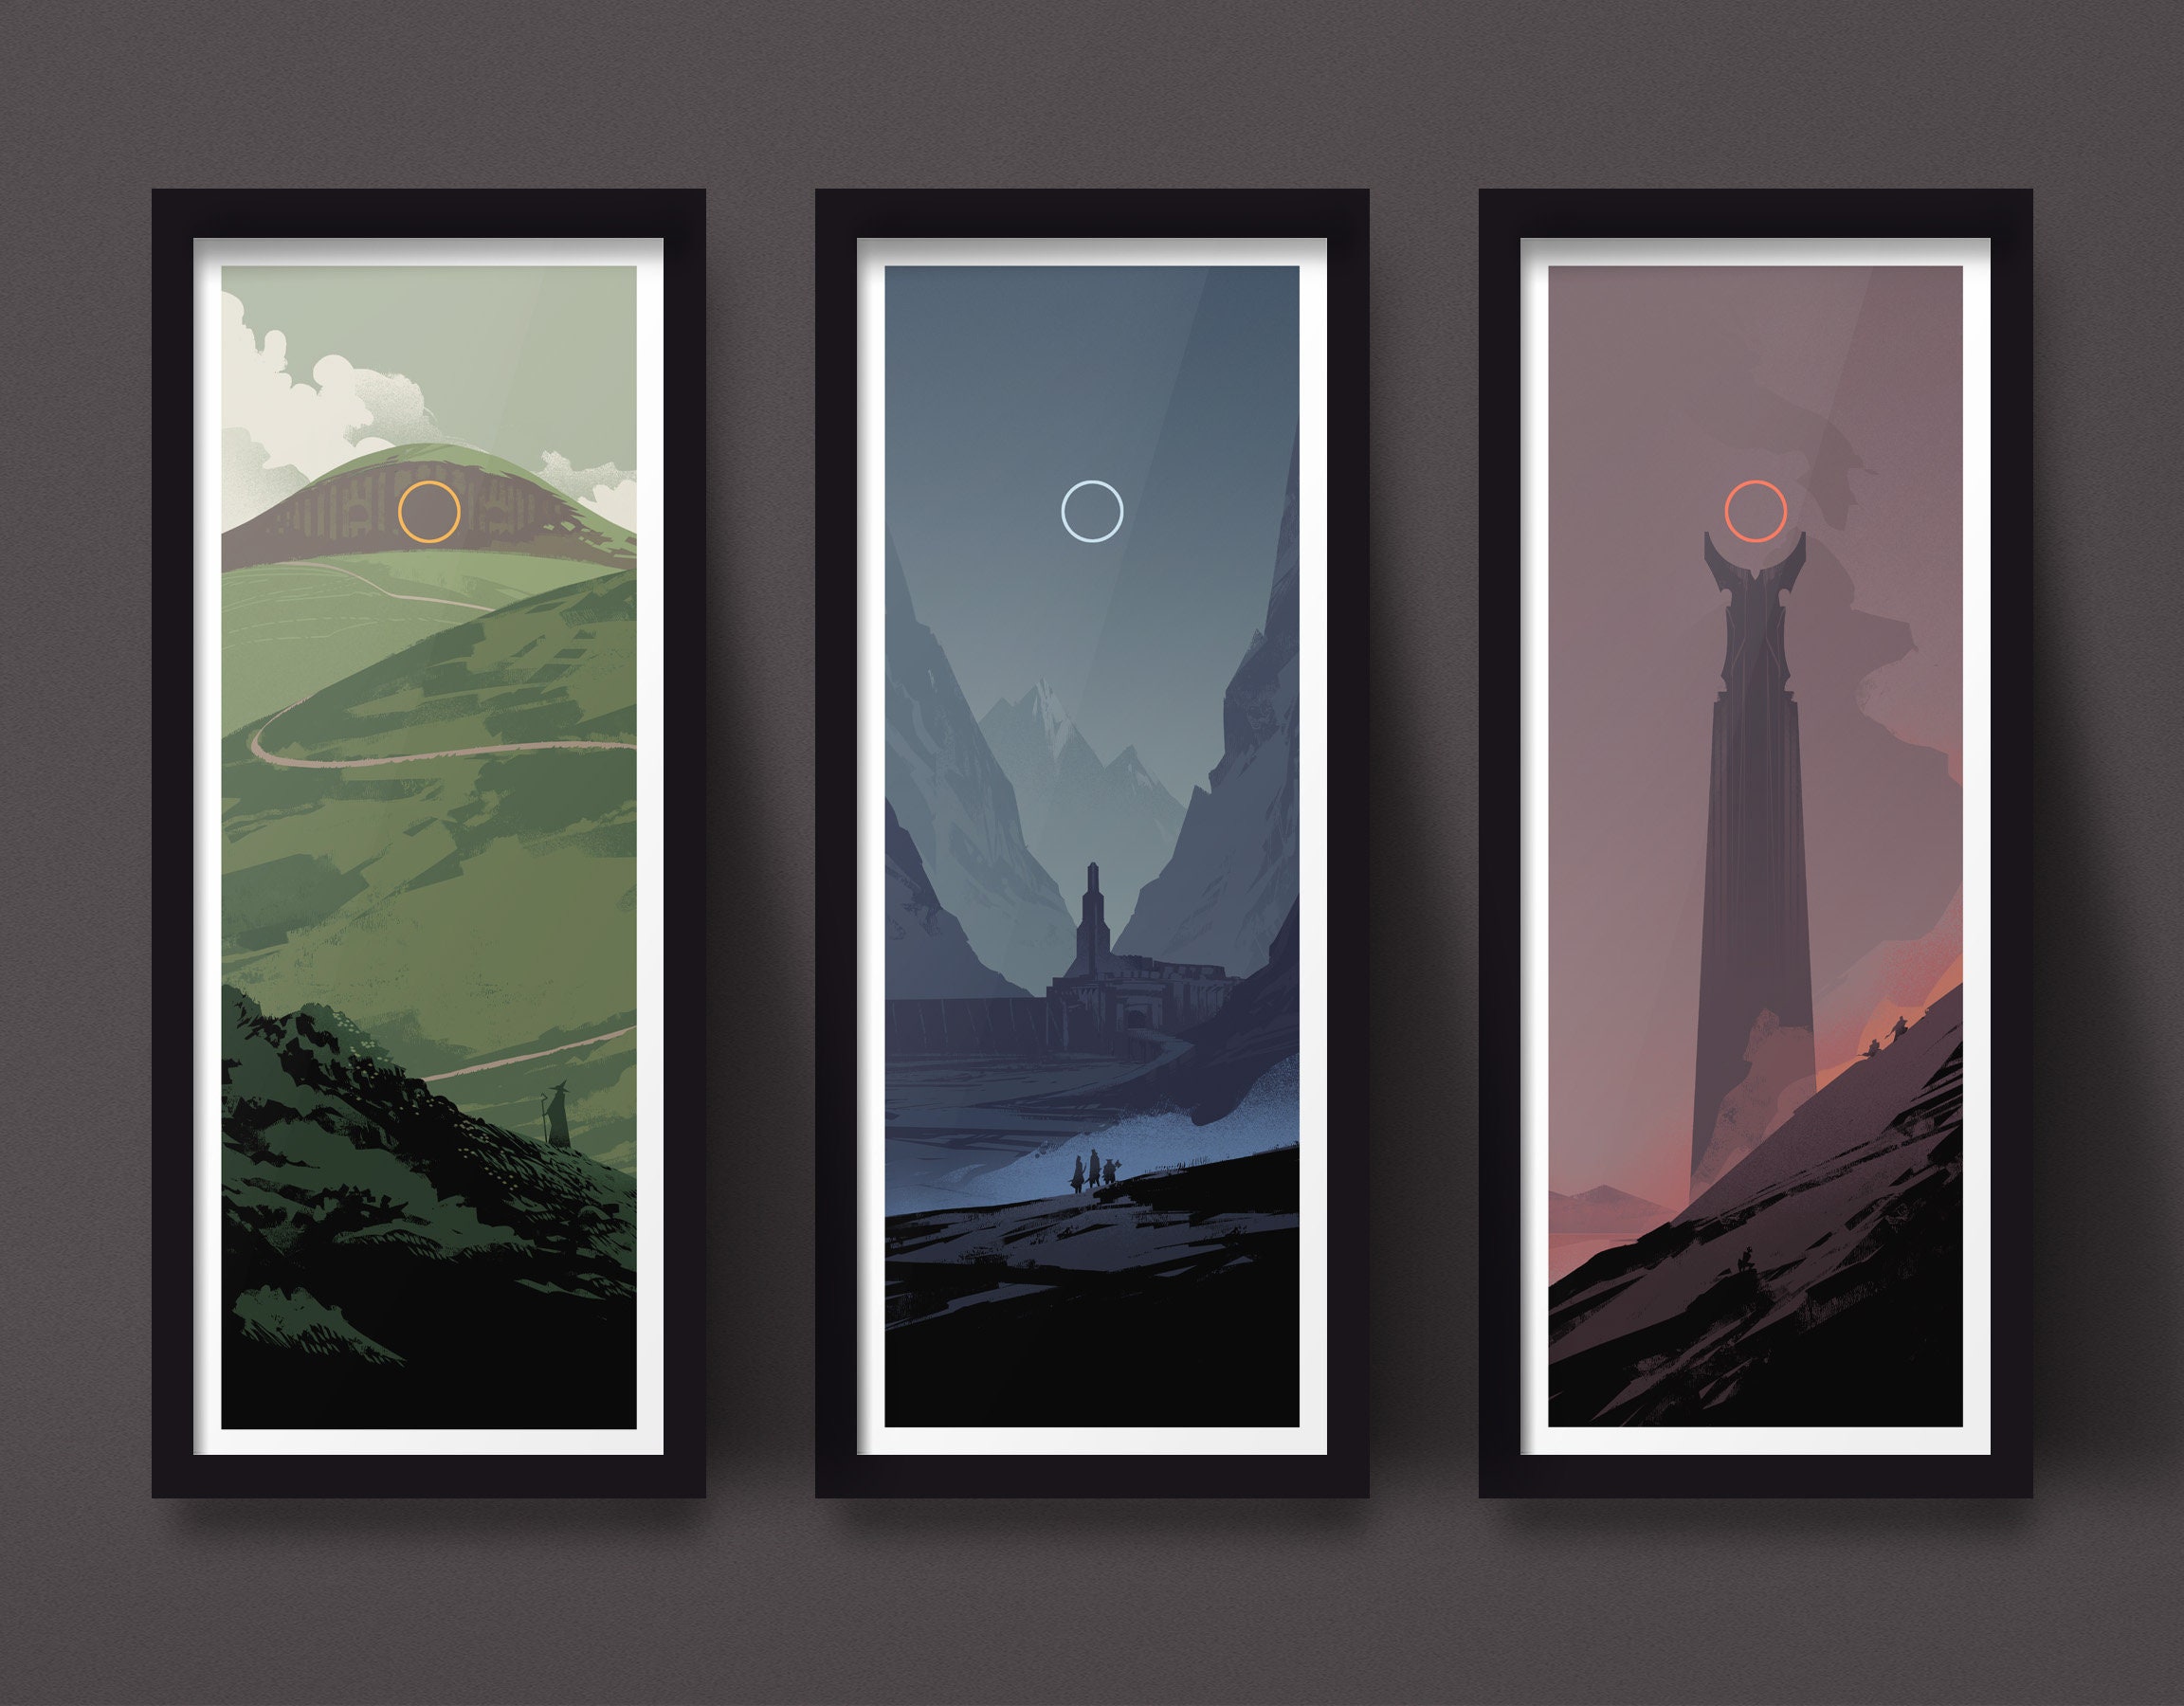 Buy The Lord of the Rings Print the One Ring Art Online in India - Etsy